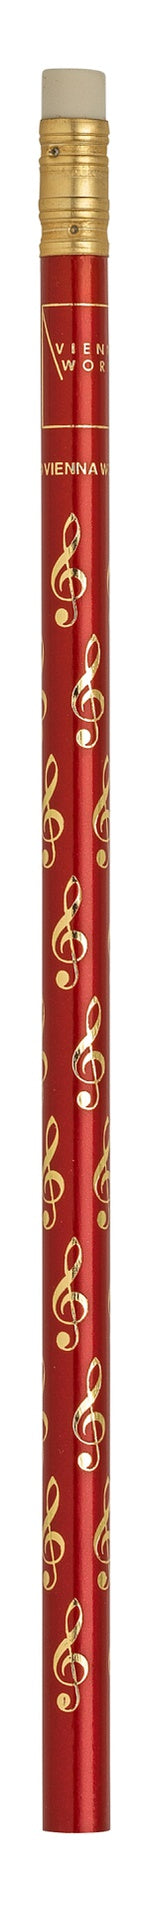 Pencil Red with Gold Treble Clefs